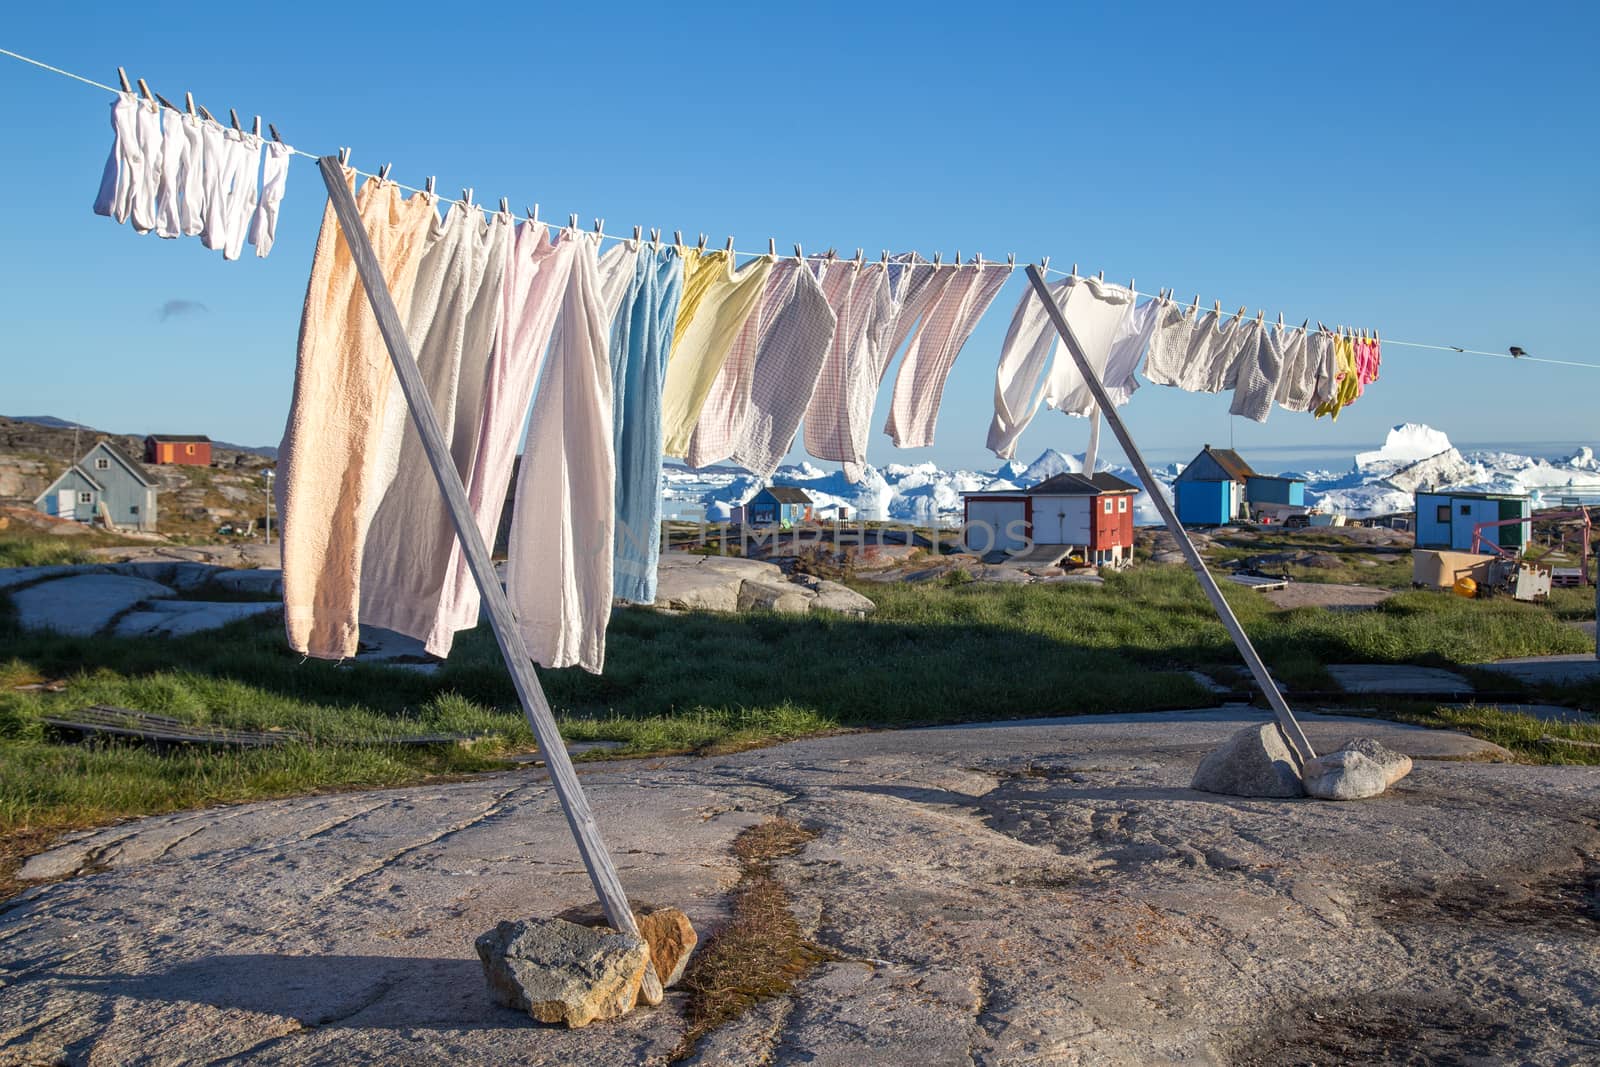 Rodebay, Greenland - July 9, 2018: A clothes line with colorful houses and icebergs in the background.